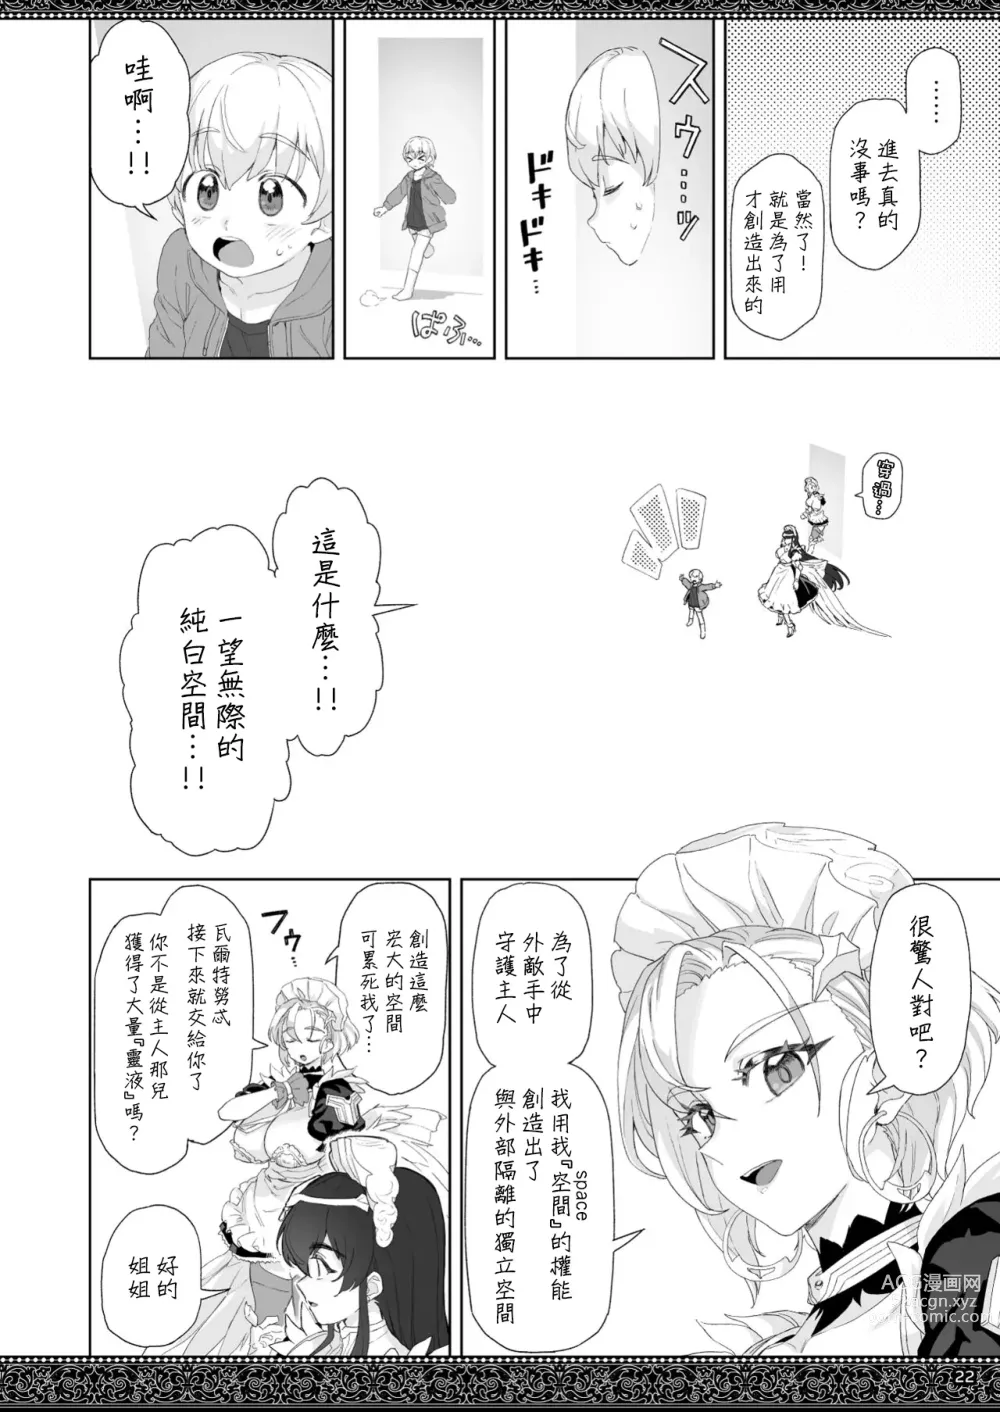 Page 22 of doujinshi 天上世界的女僕們